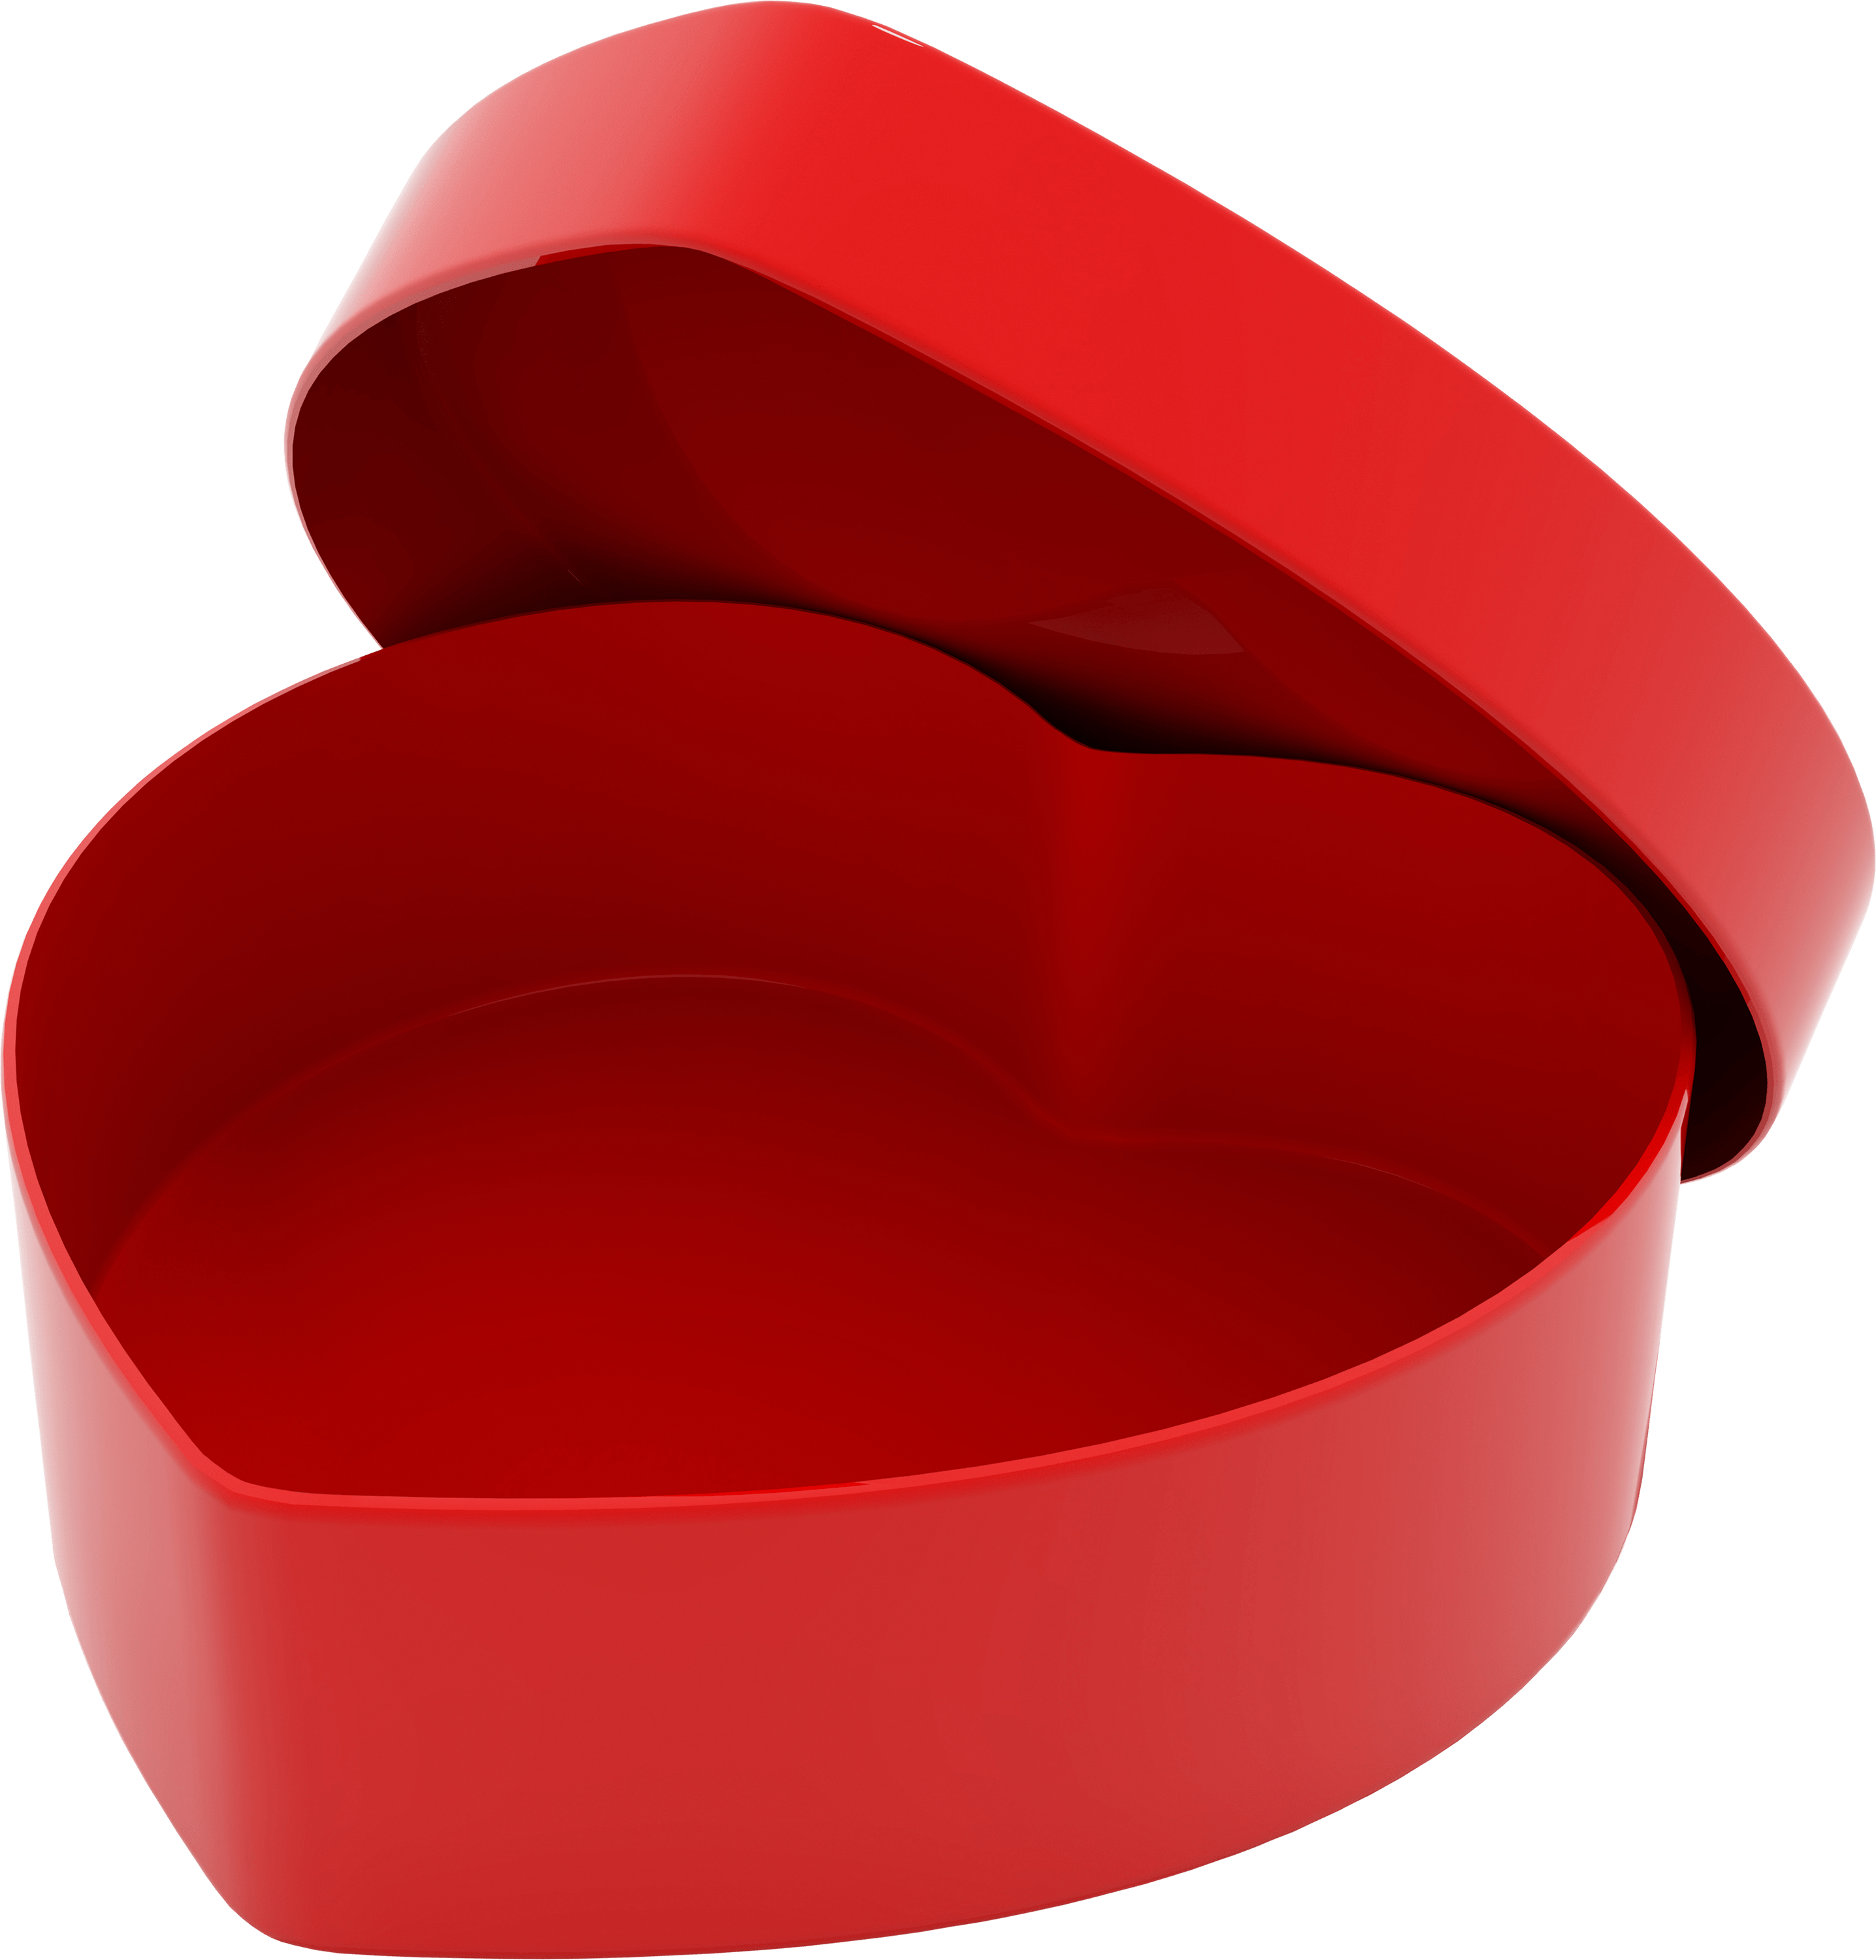 Box Heart PNG Image High Quality PNG Image